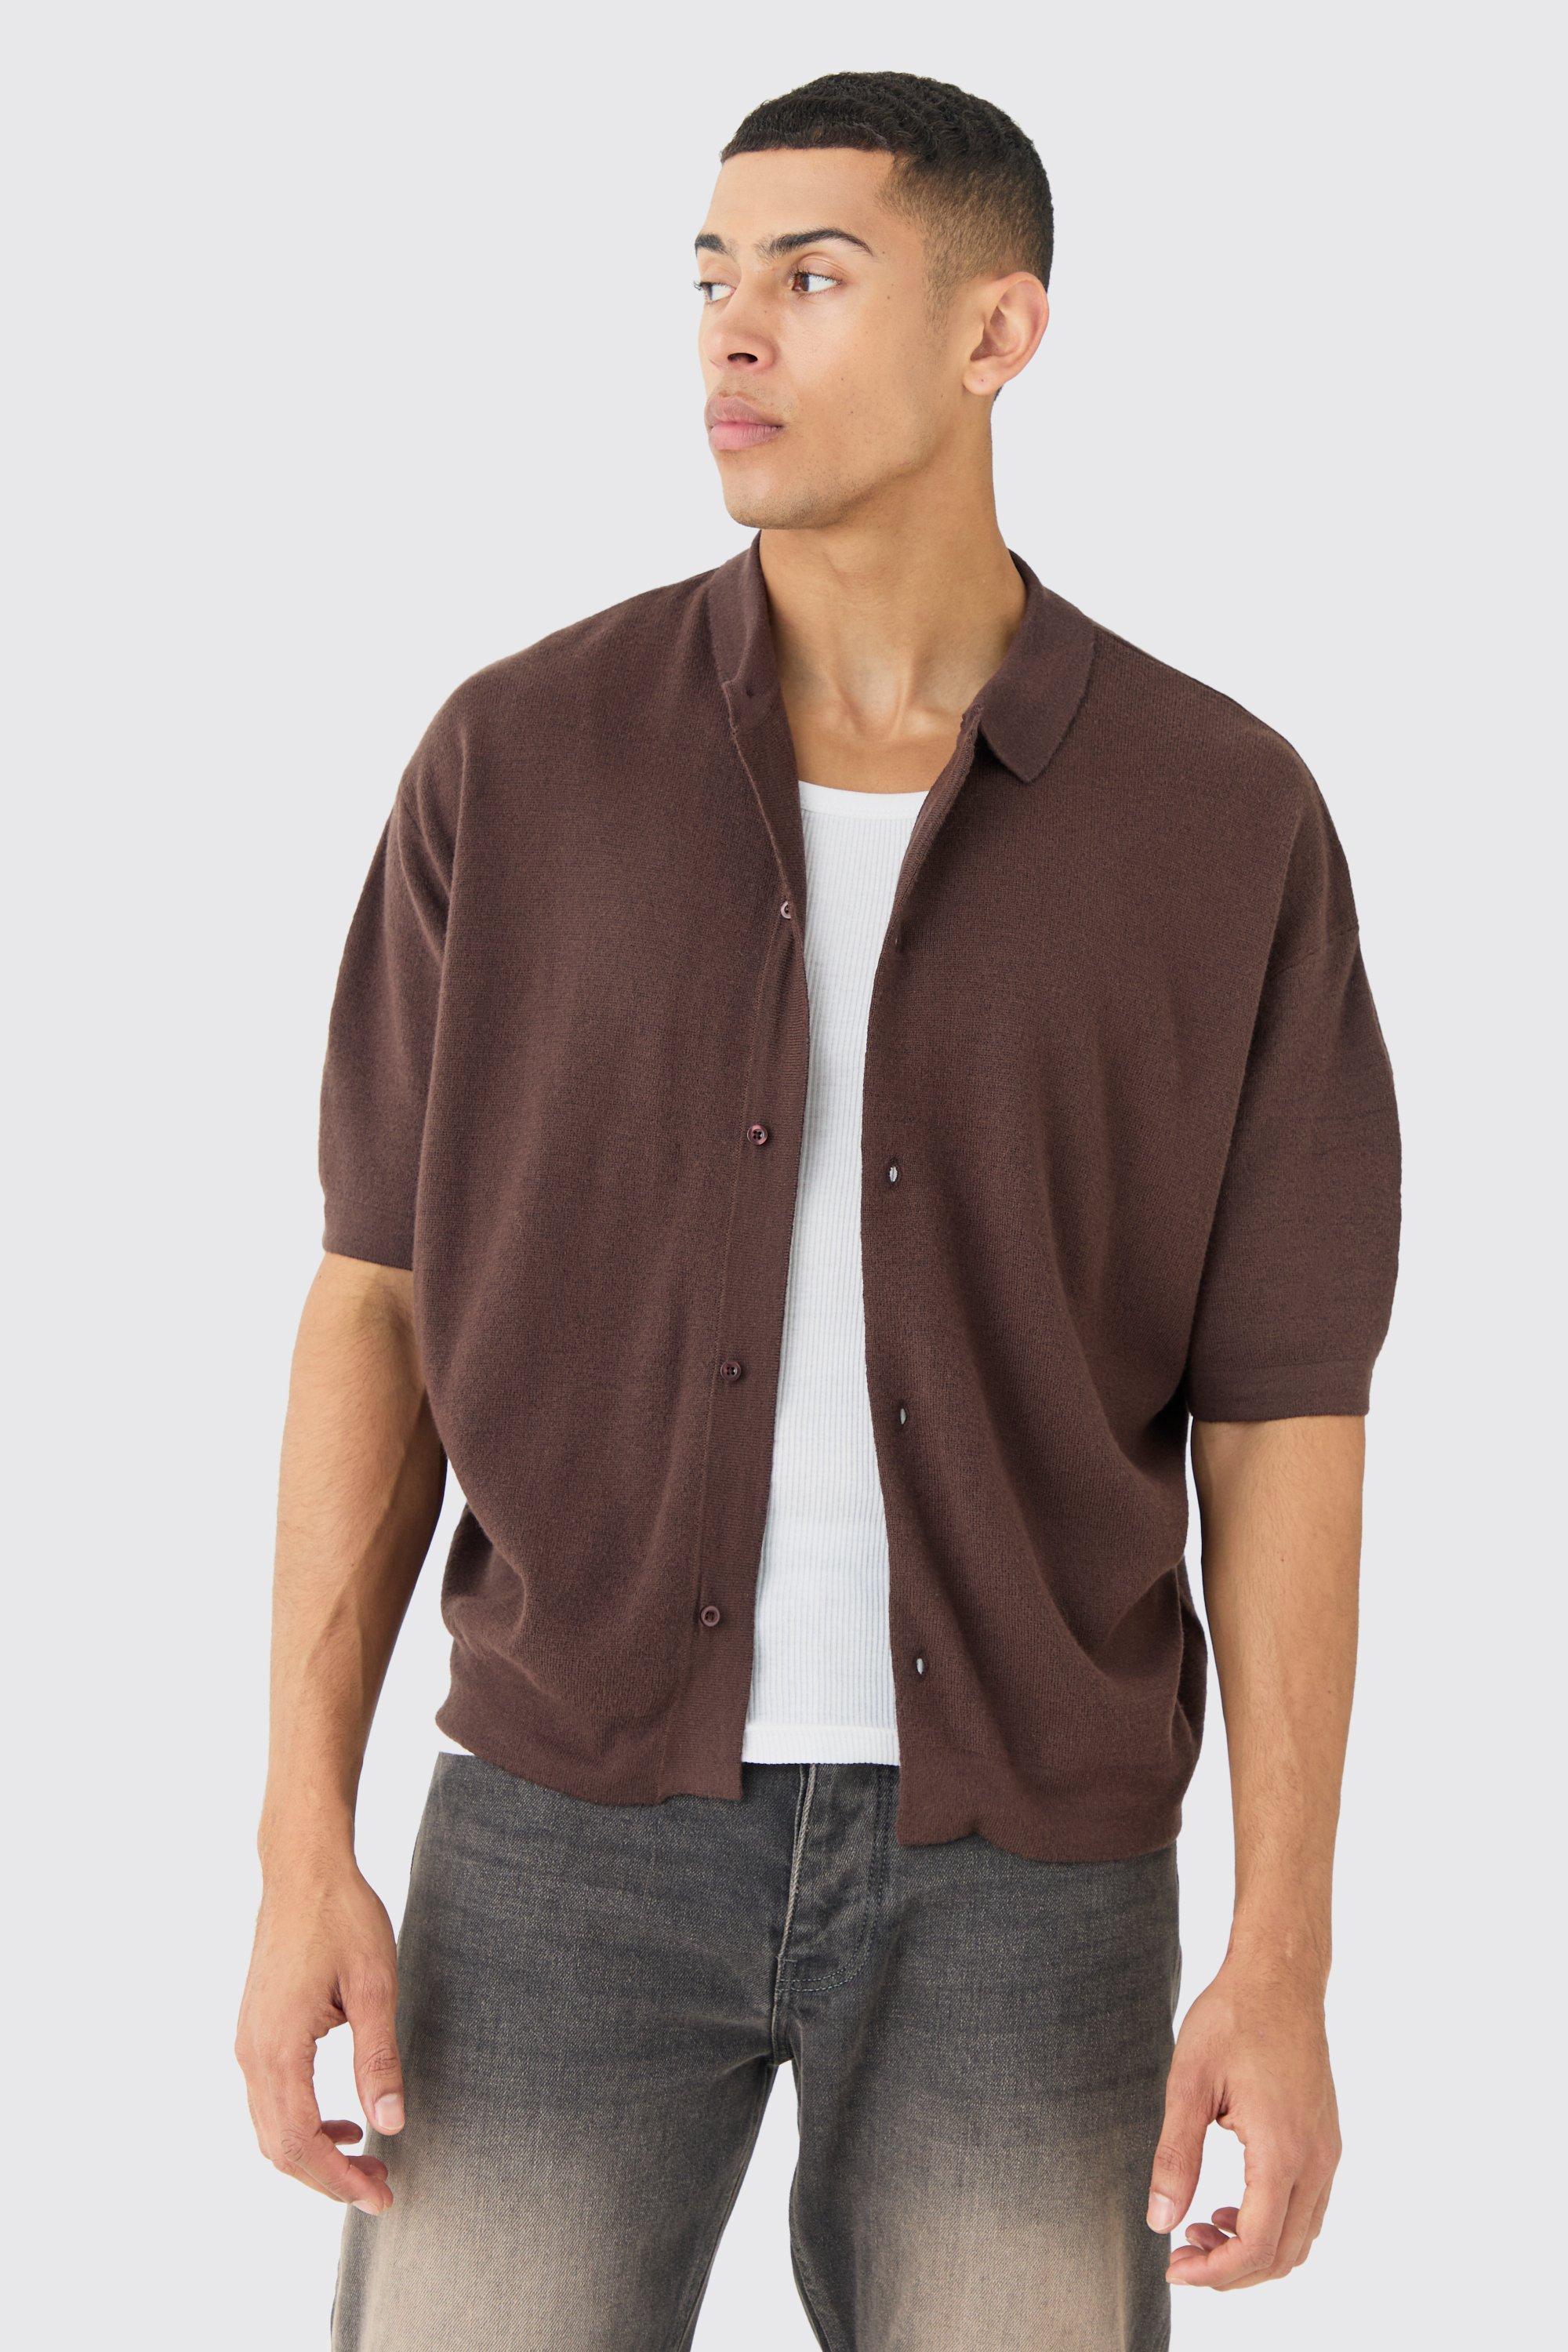 Image of Oversized Boxy Fit Short Sleeve Knitted Shirt, Brown